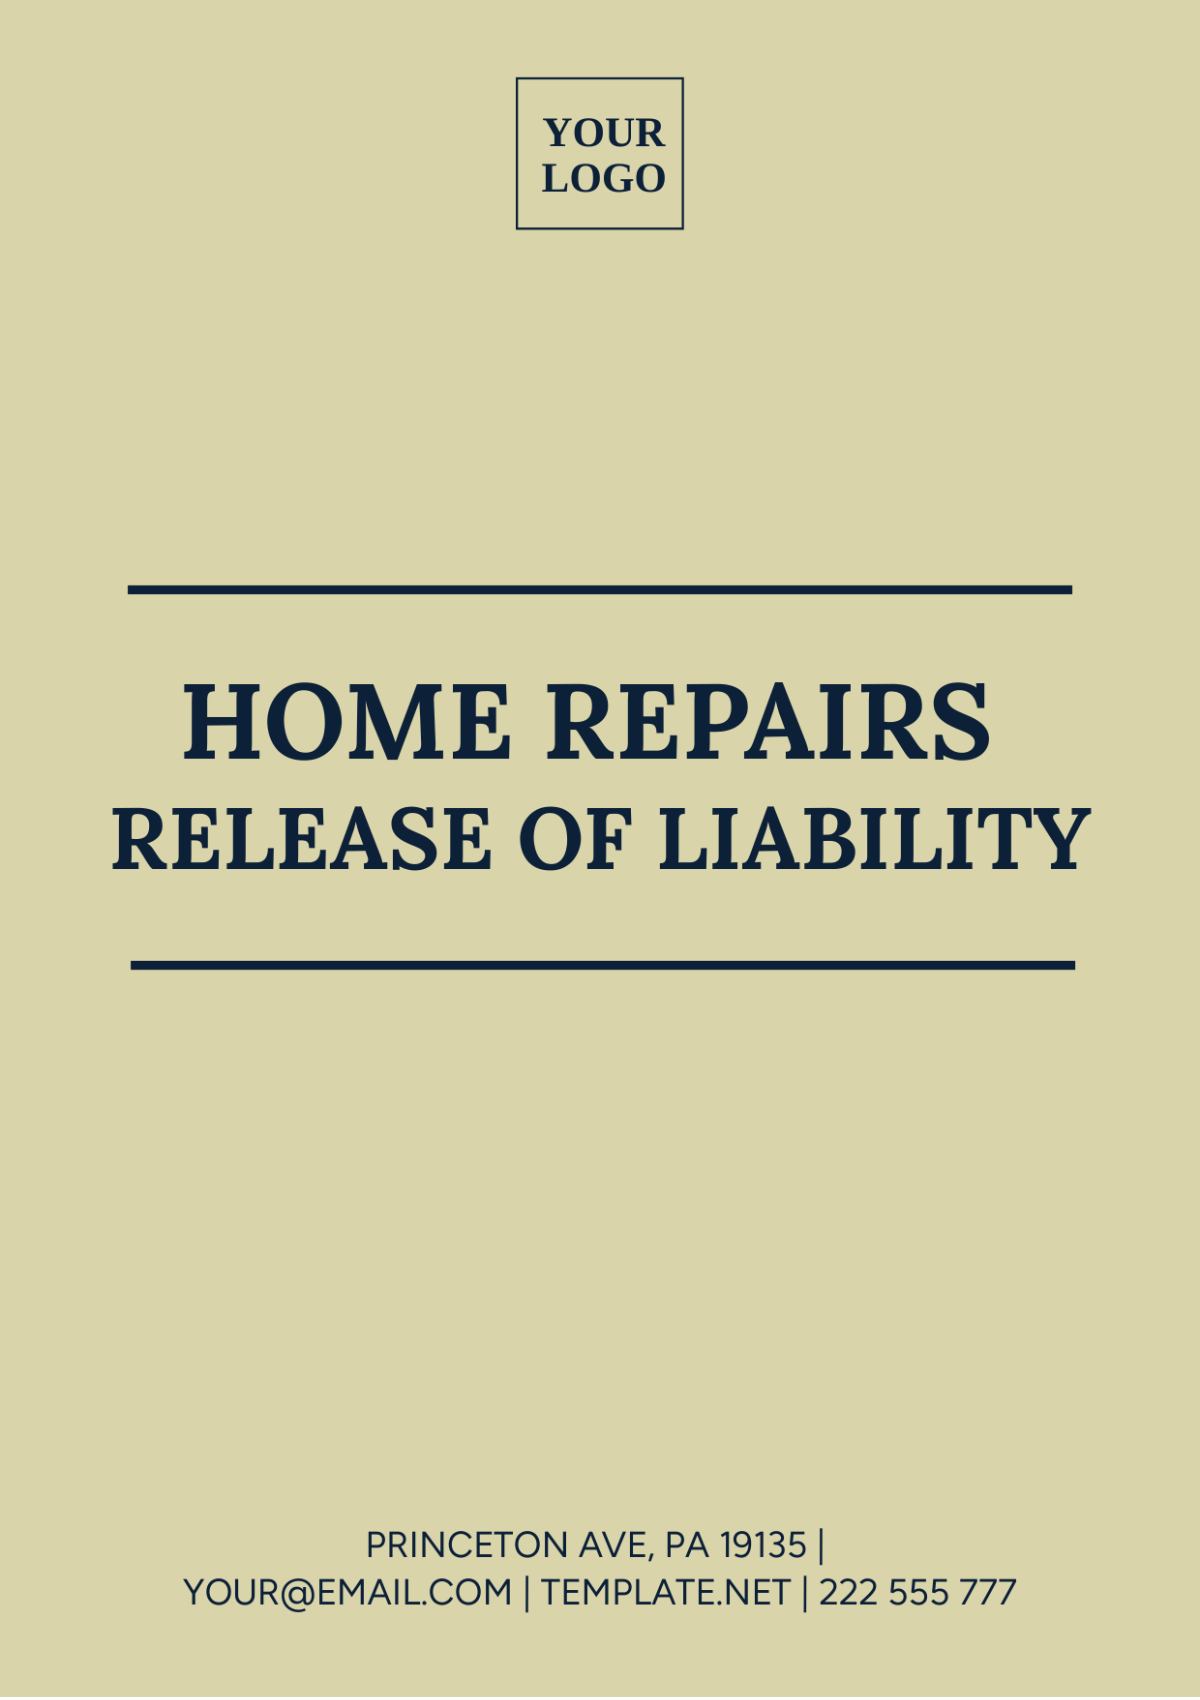 Home Repairs Release of Liability Template